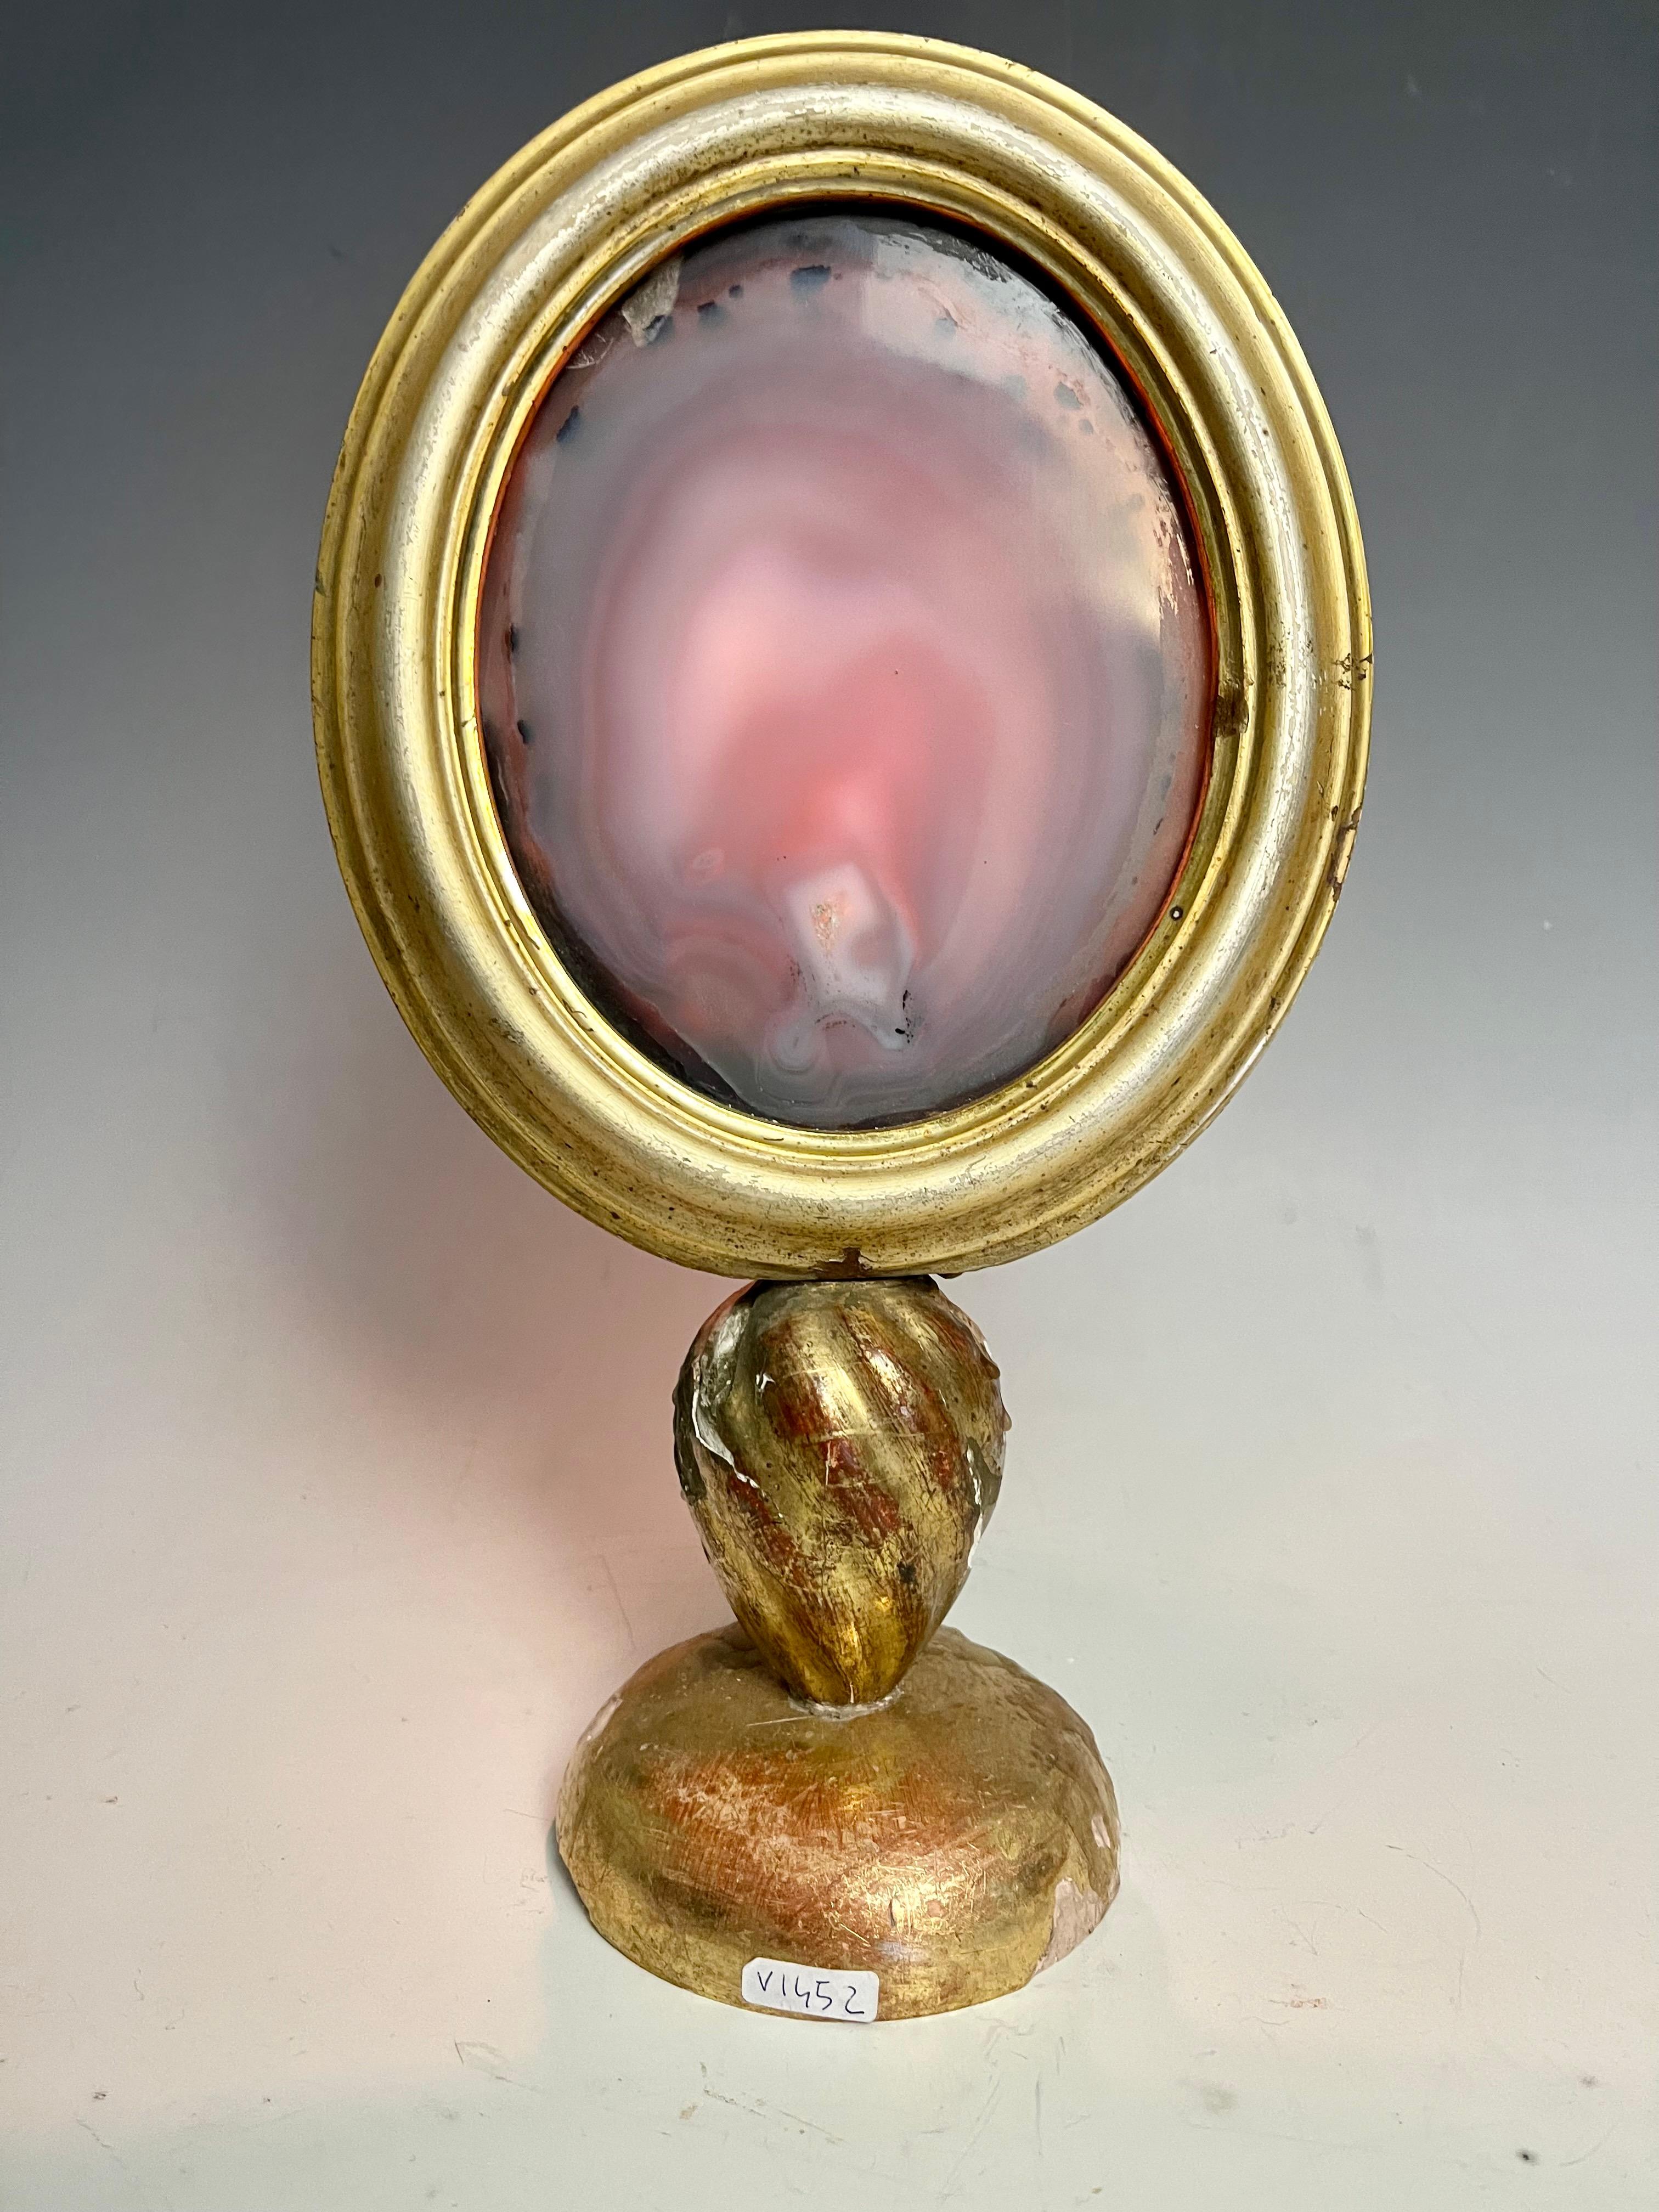 A Wunderkammer natural specimen of an agate, mounted in an oval shape frame over a golden wooden base, with candle holder. Italy, 1880 ca.